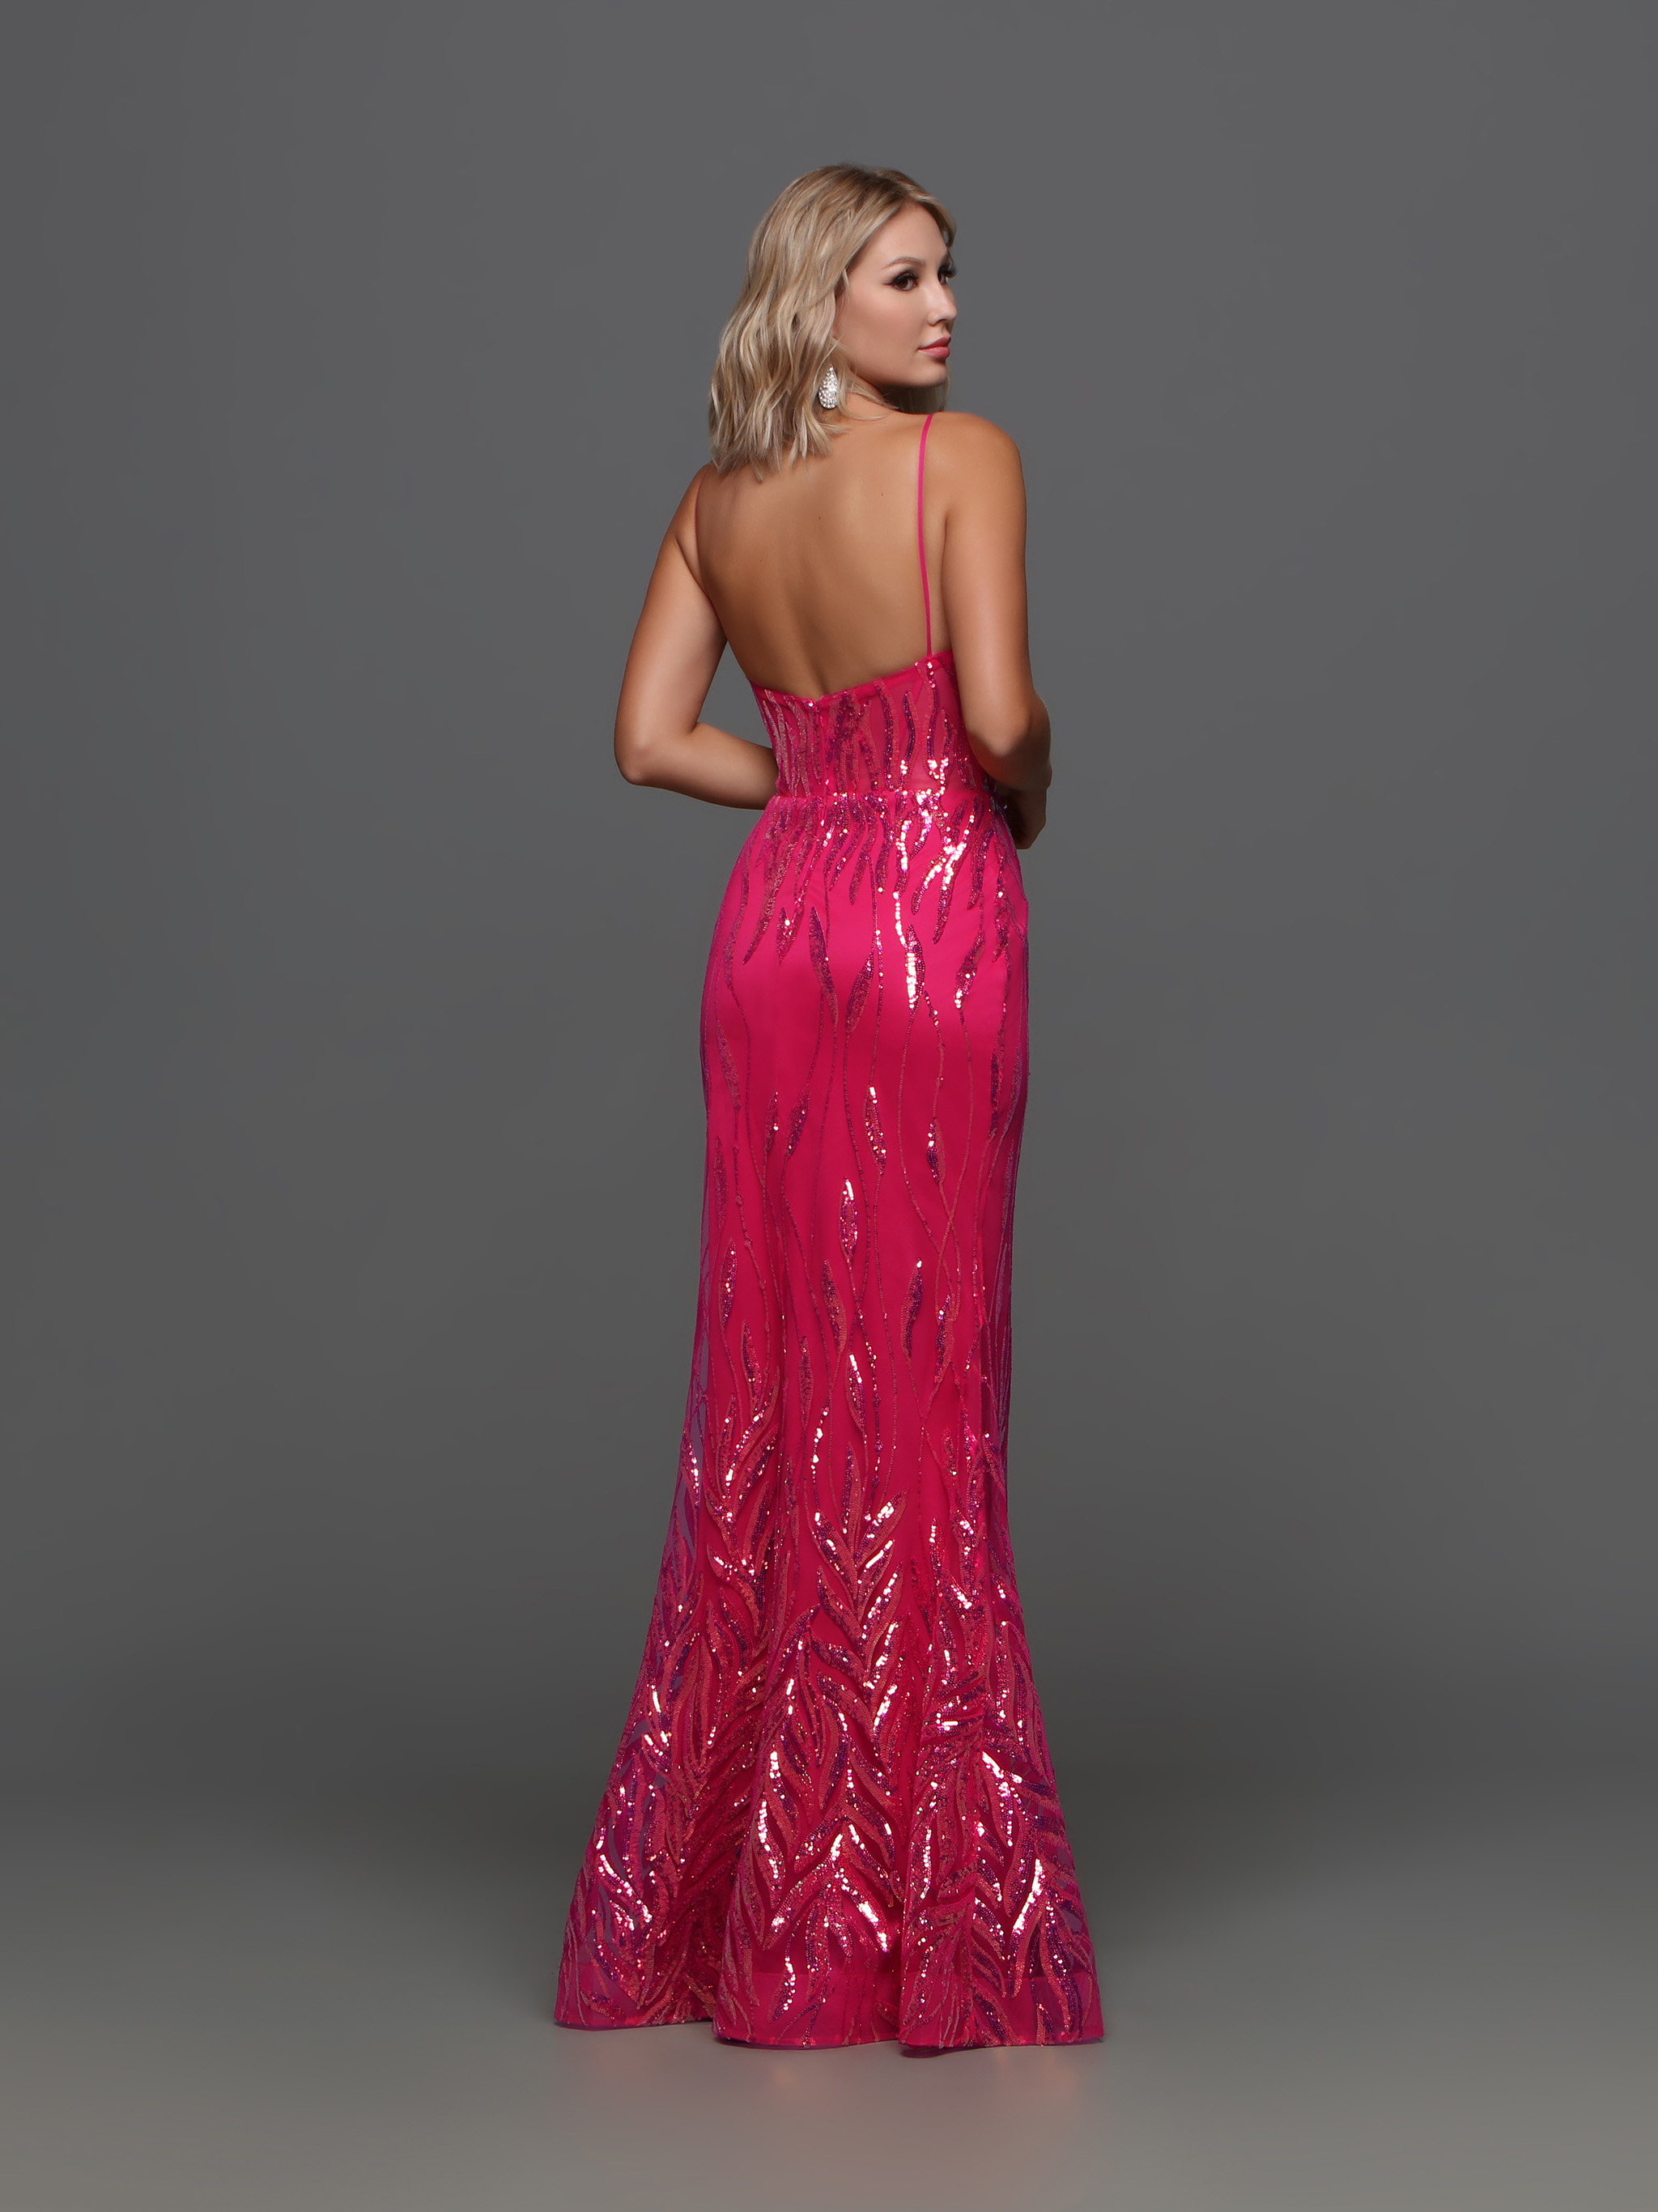 Image showing back view of style #72318